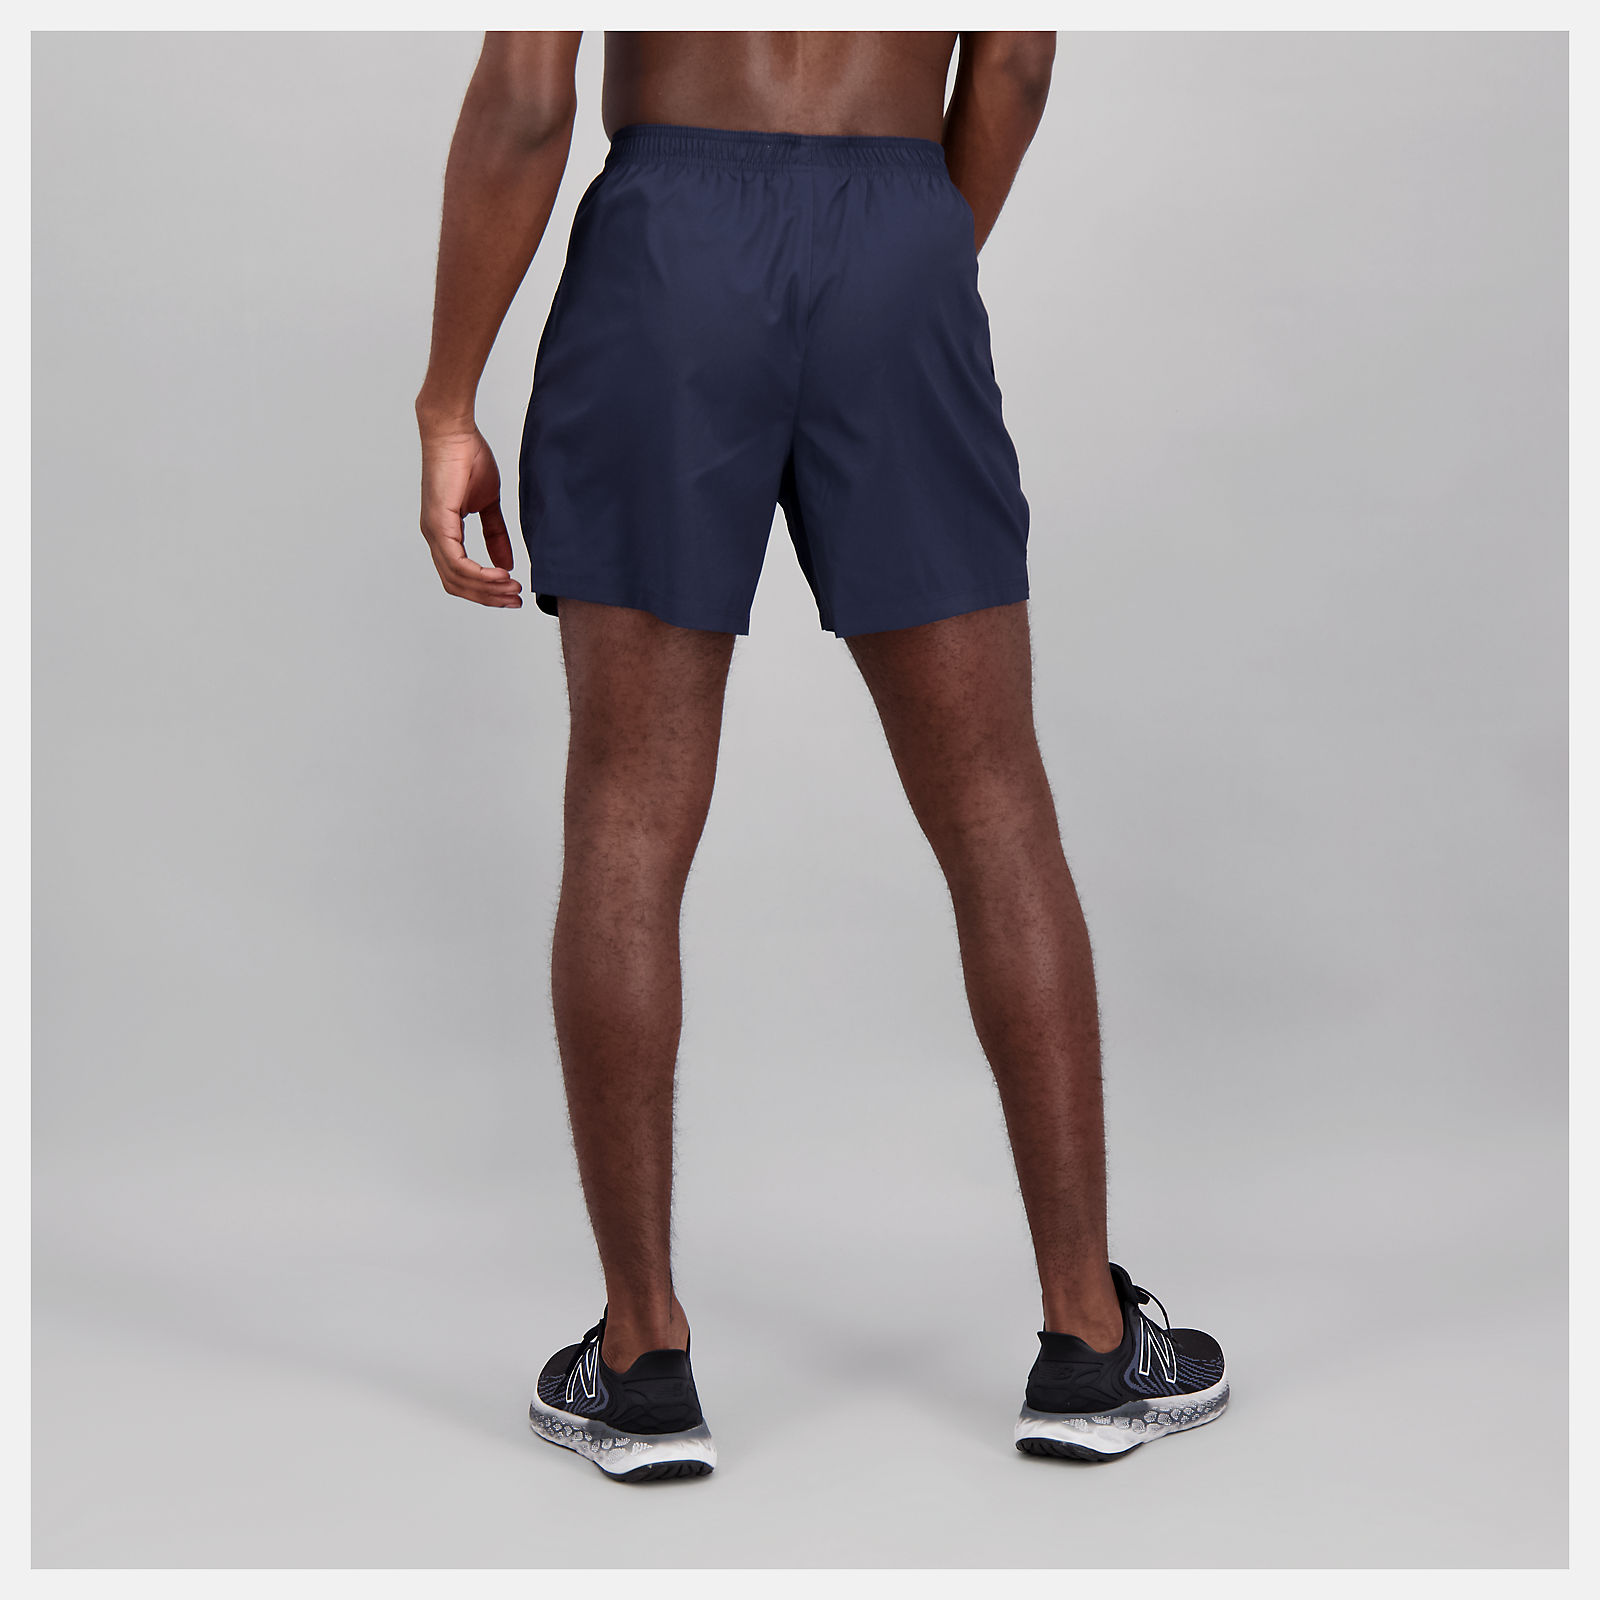 Accelerate 5 inch Short - Joe's New Balance Outlet